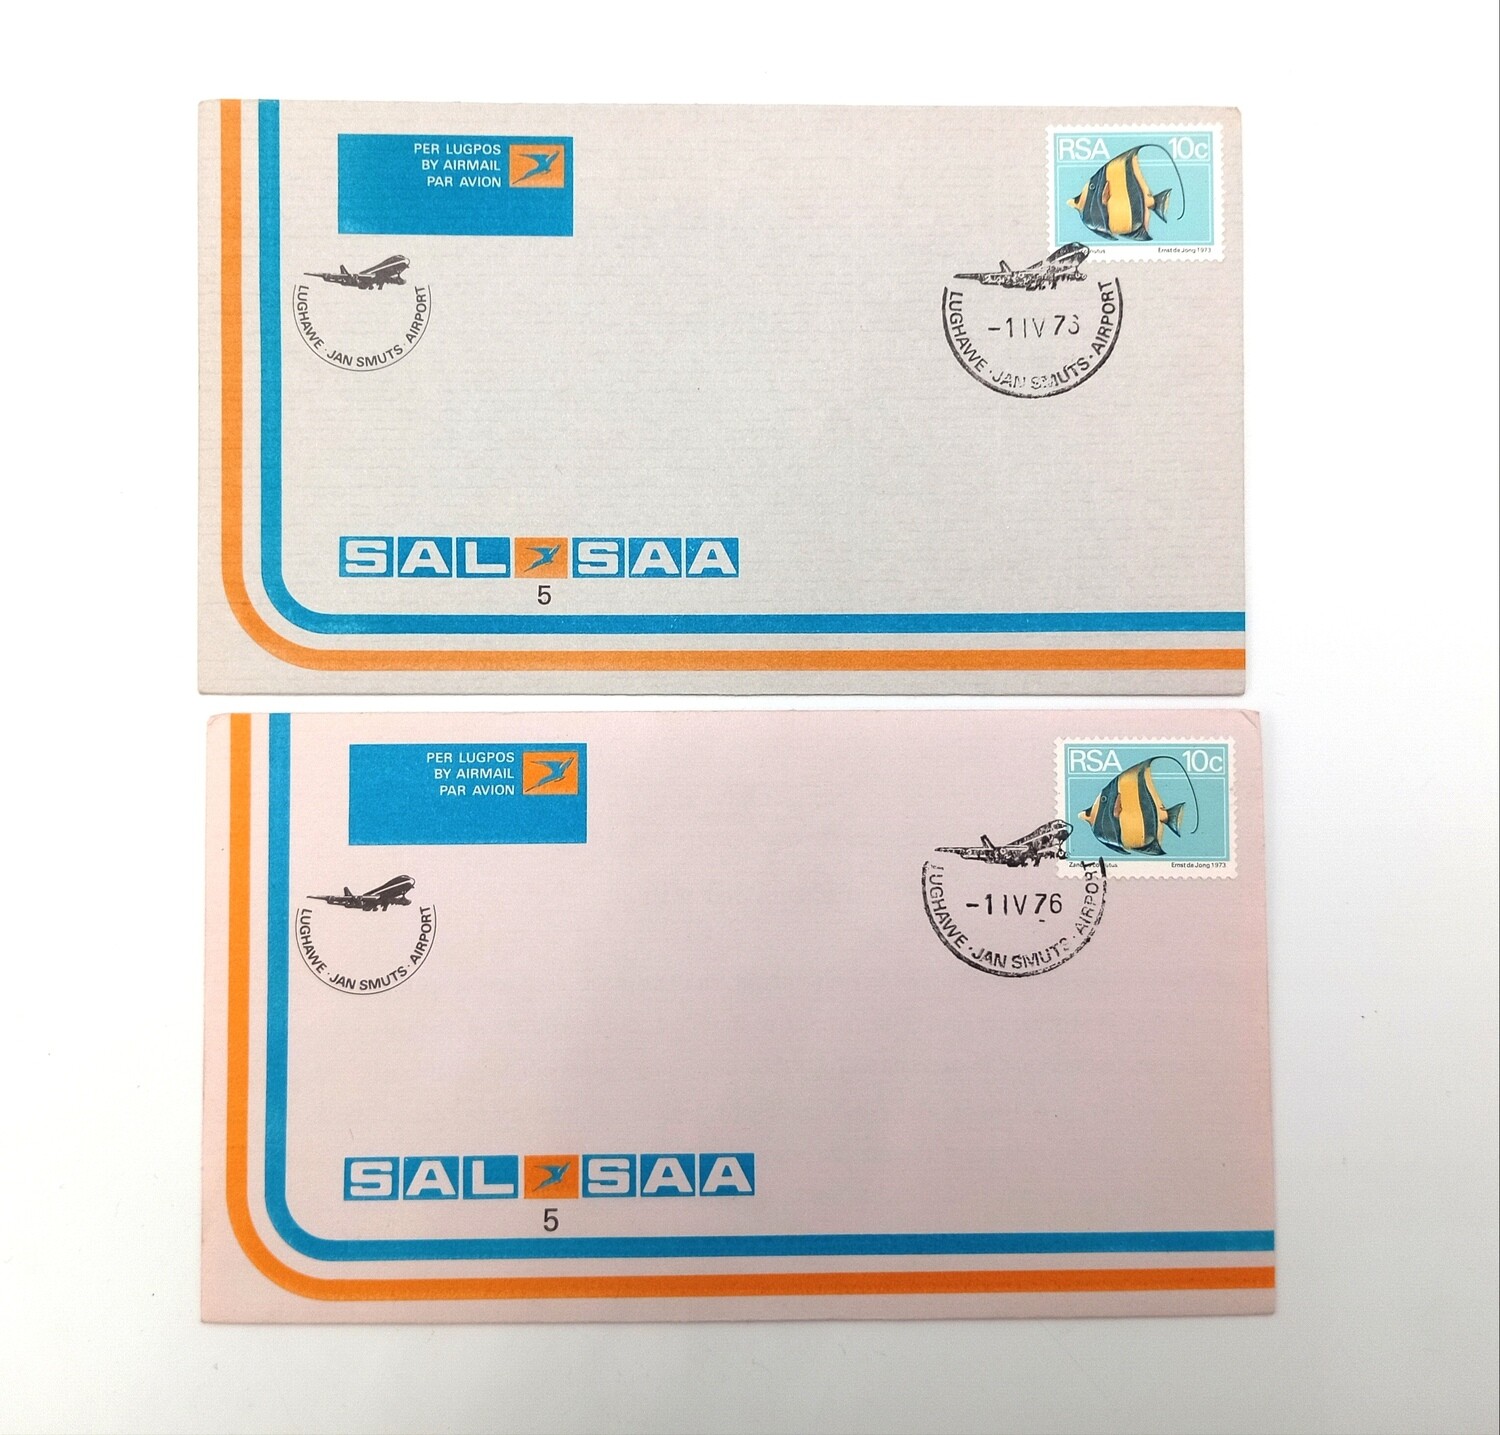 Pair of SAA flight covers no 5 - one on blue paper envelope and one on pink paper envelope